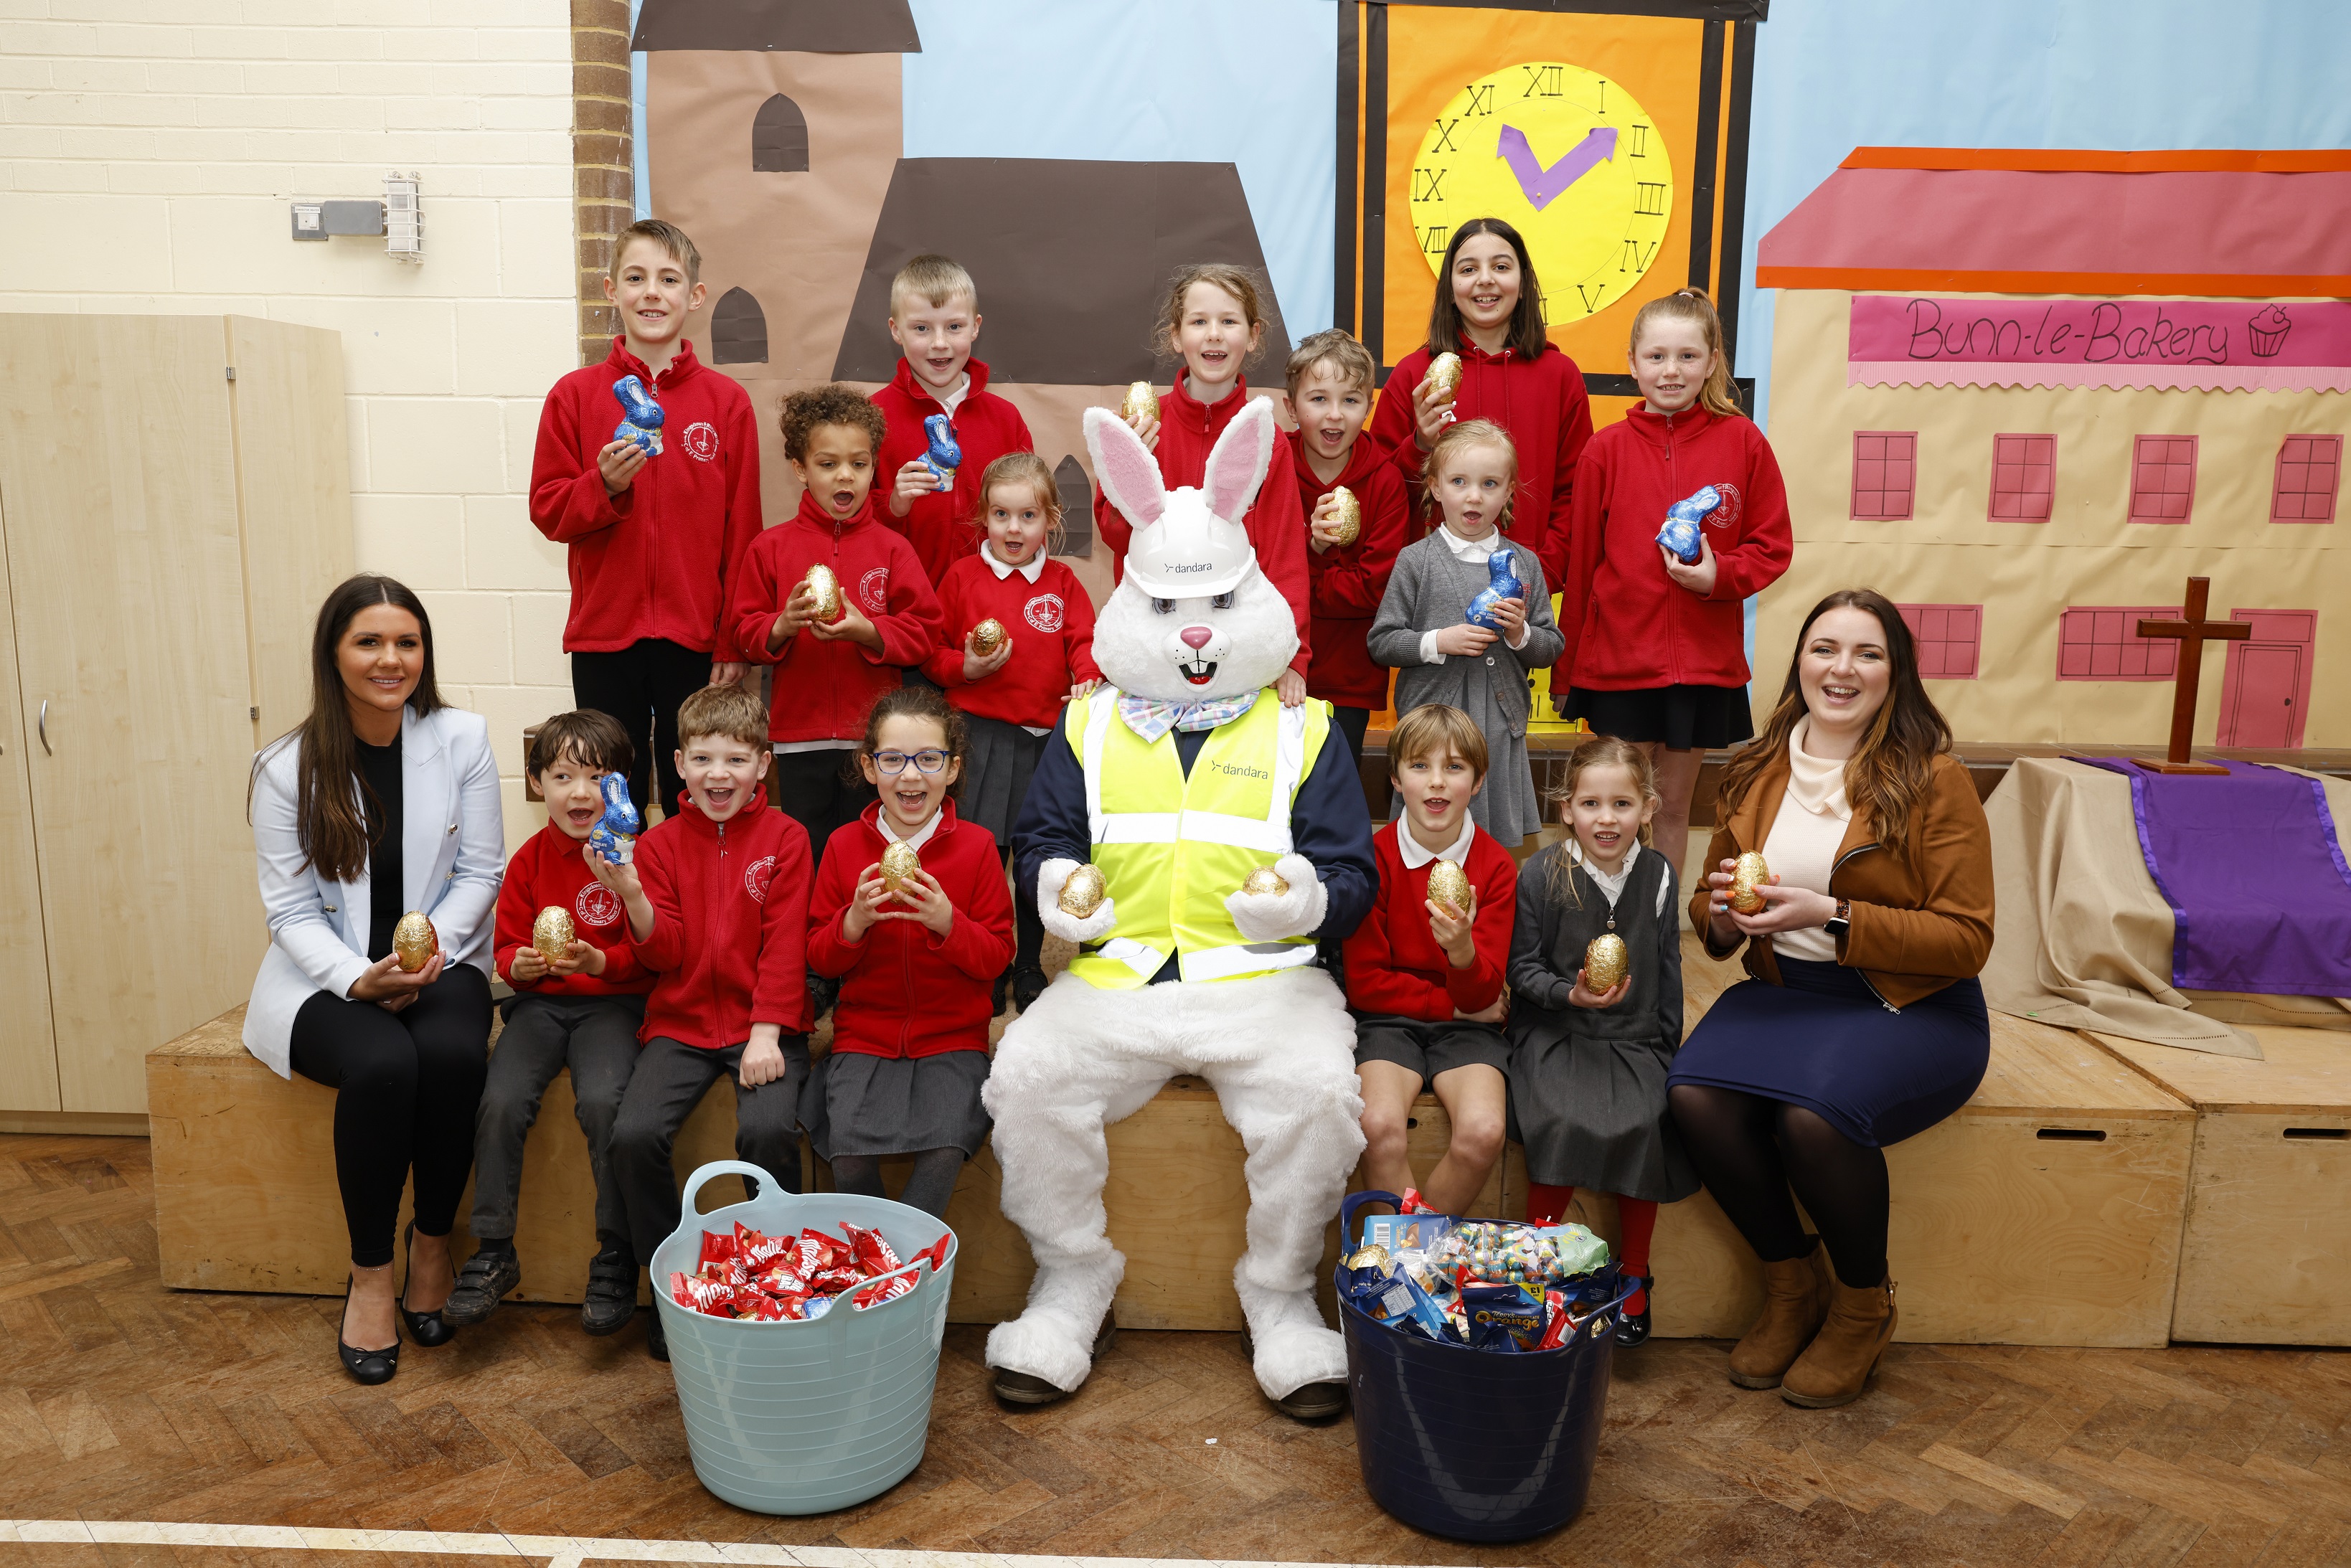 Easter bunny visits local school 1